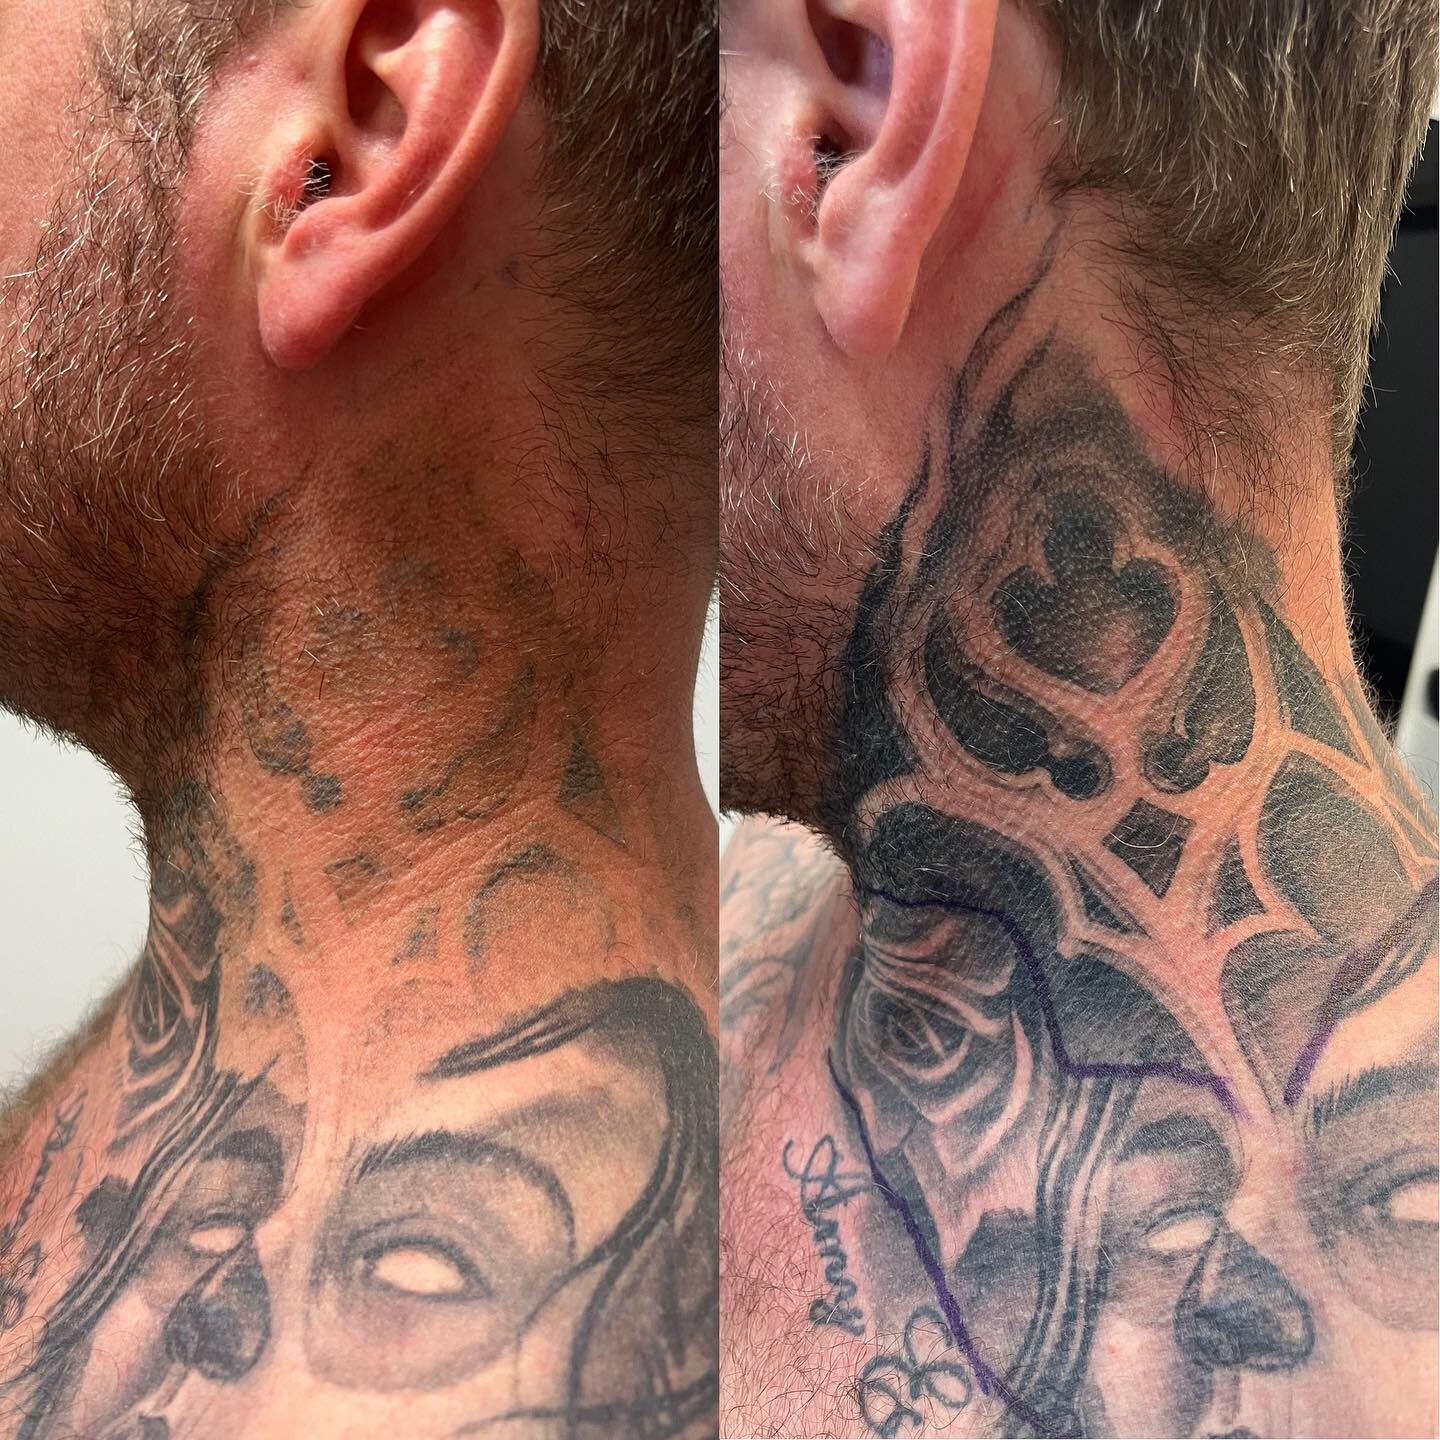 Got a tattoo you need touched up or just want to knock out some ink to lay down some new designs? Jump online and book a free consultation so we can discuss your options. 
.
This tattoo required 2 session to lighten to this effect.
.
.
.
.
.
📞 07 54